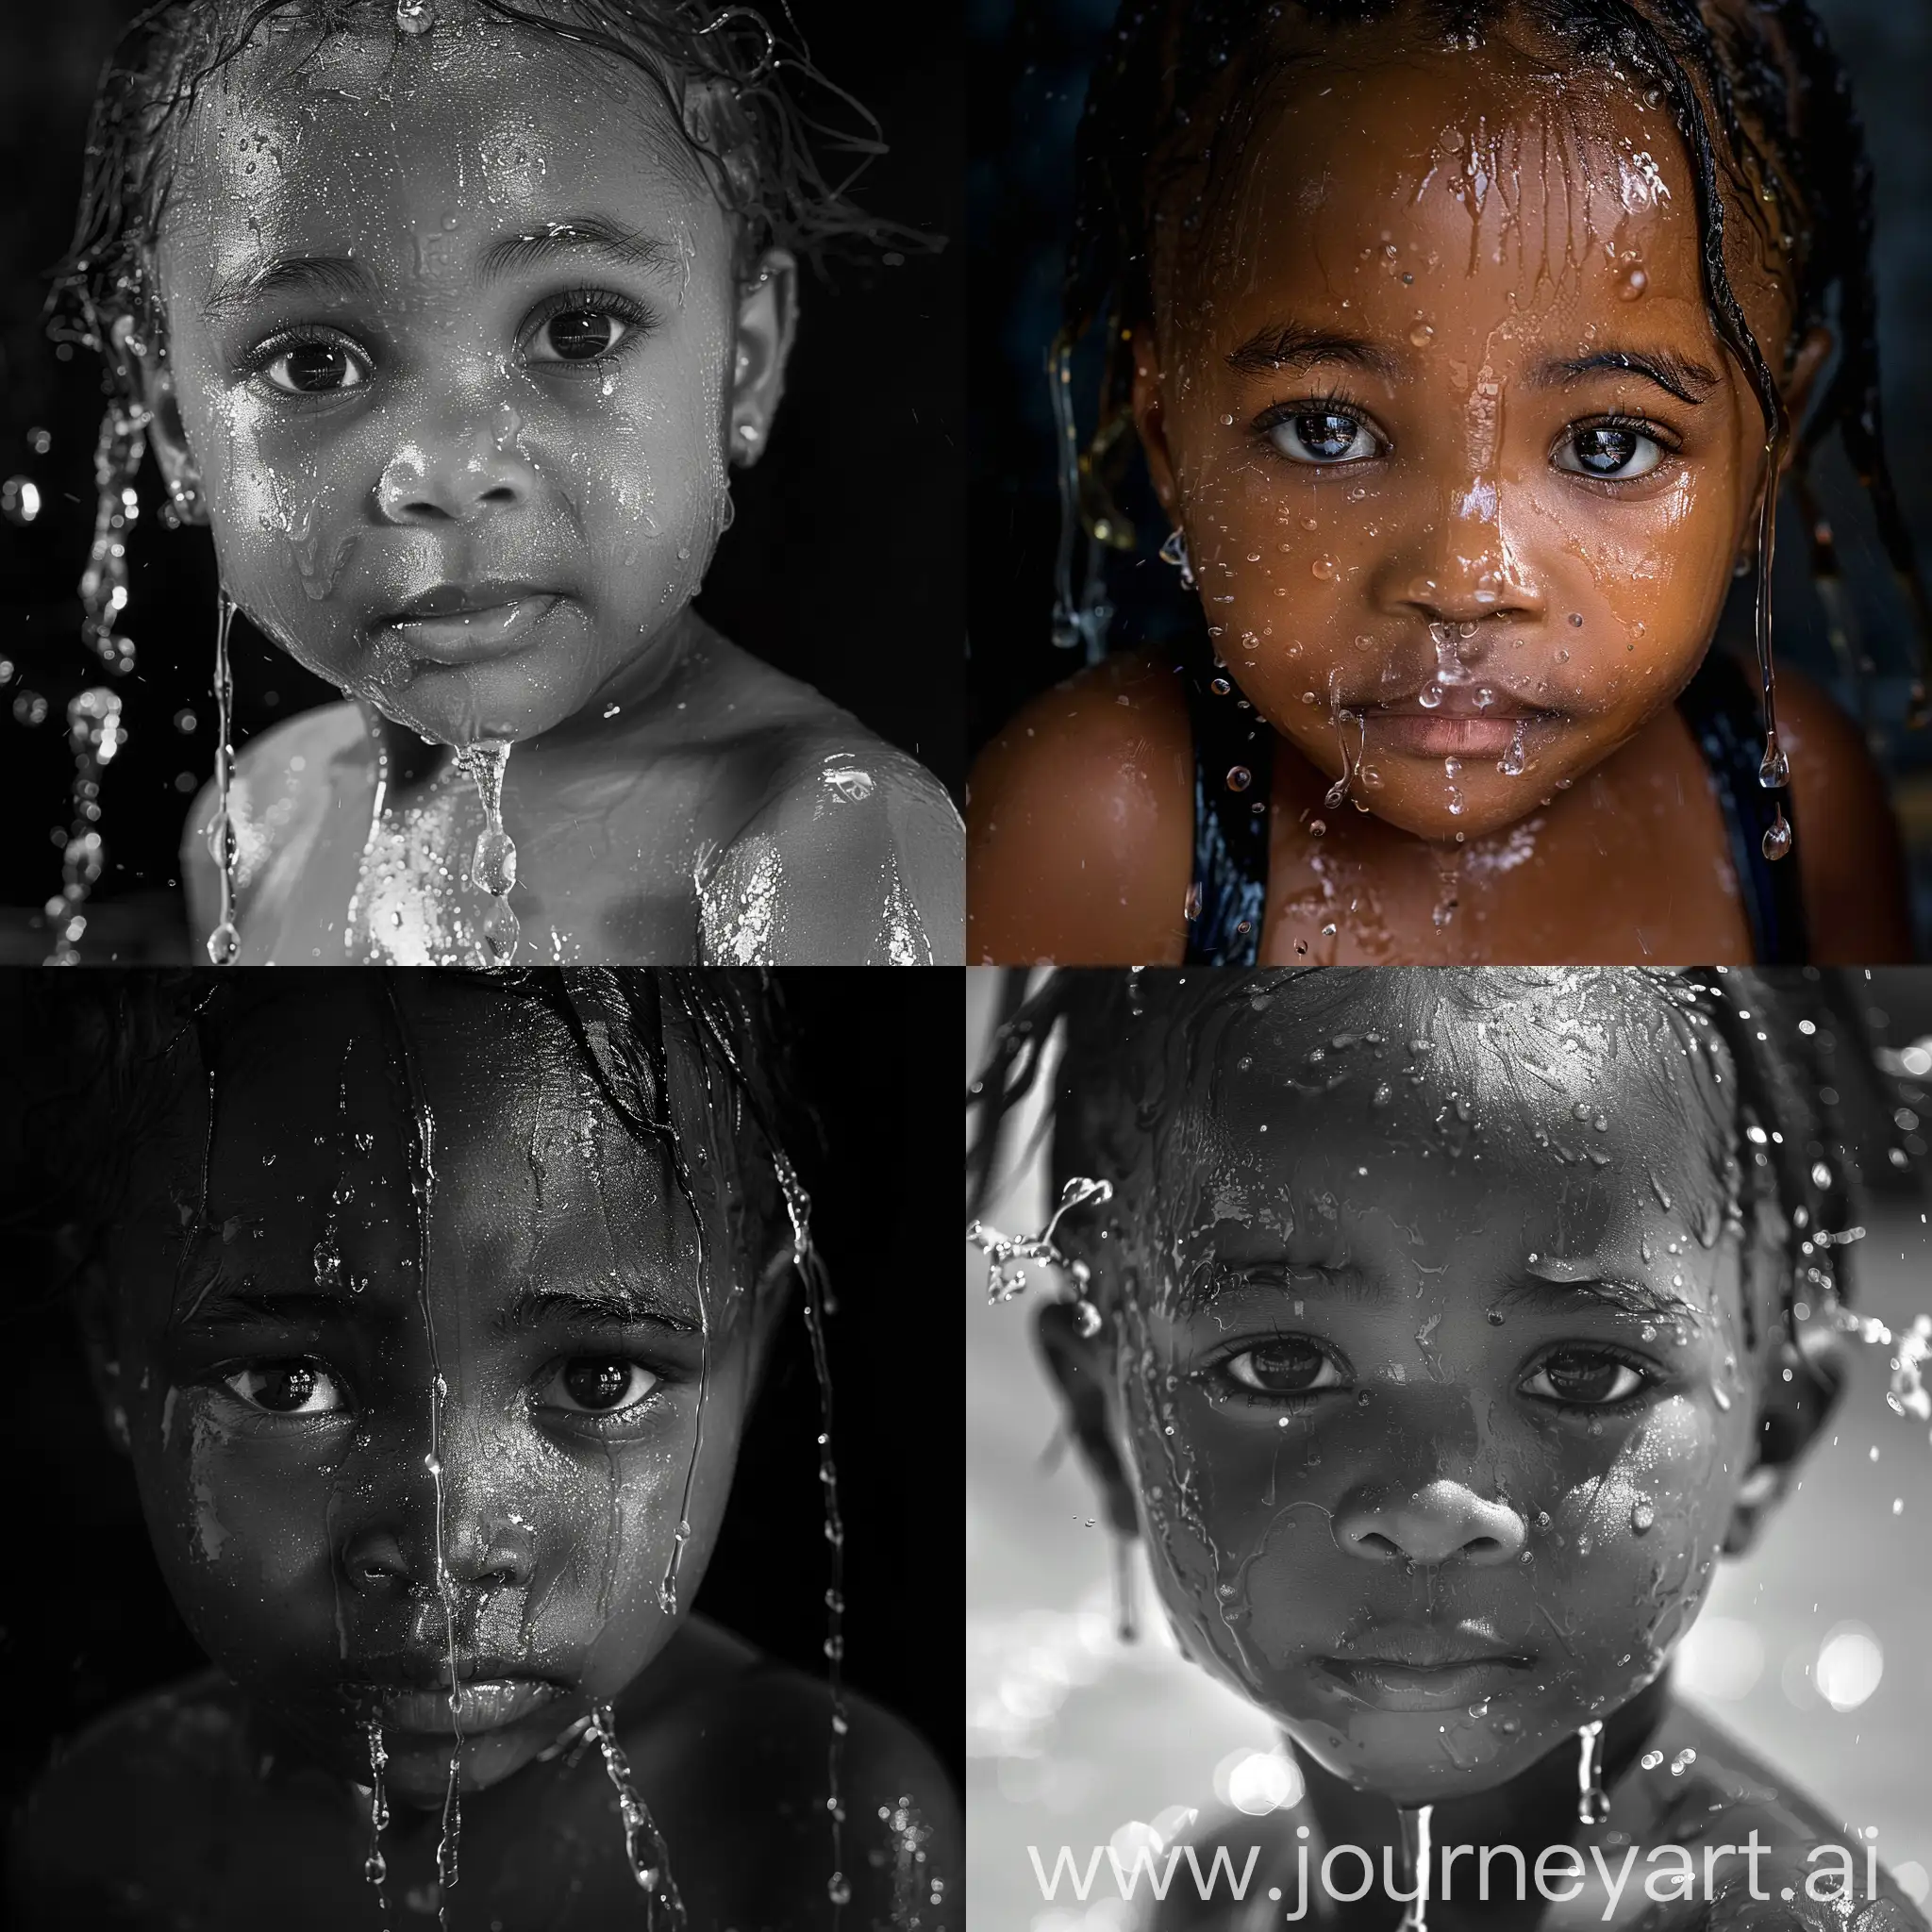 Portrait of African little girl. She has water dripping down her face as she emerges from the water She is looking at the camera.